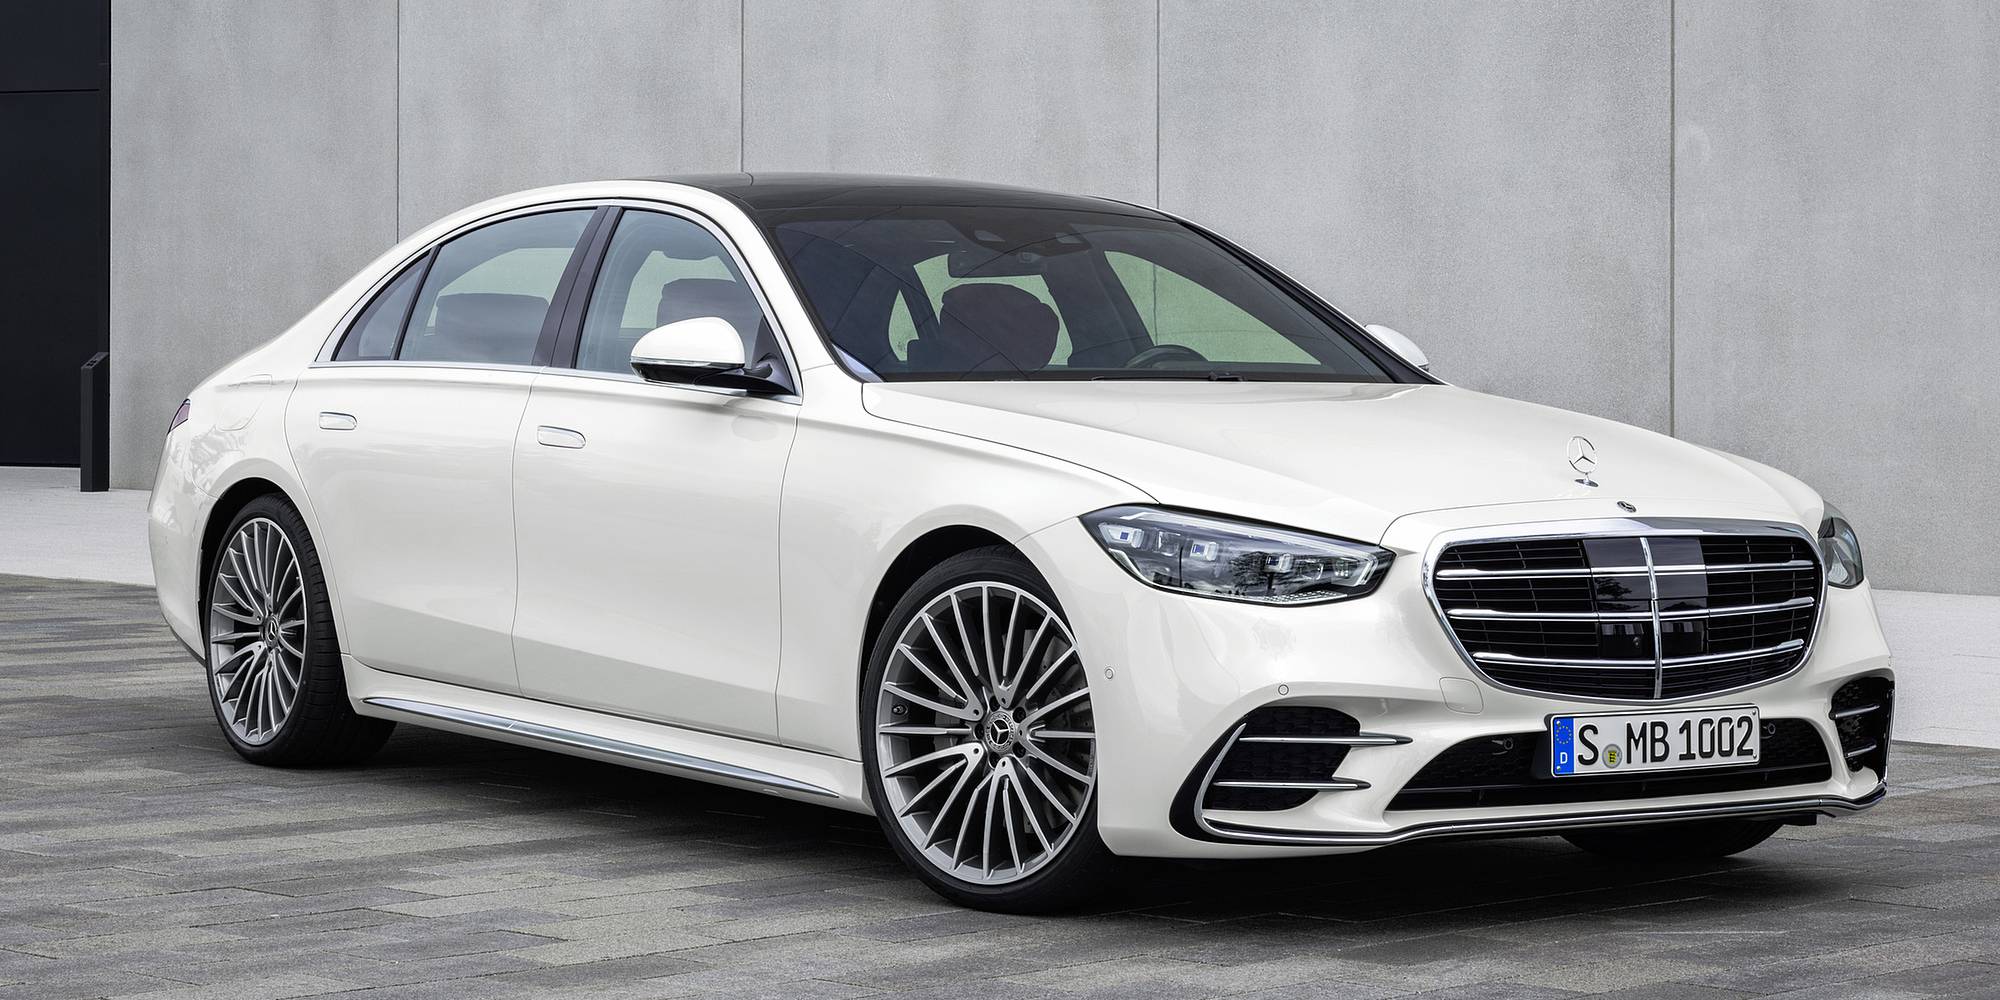 22 Mercedes Benz S Class Costs Facts And Figures